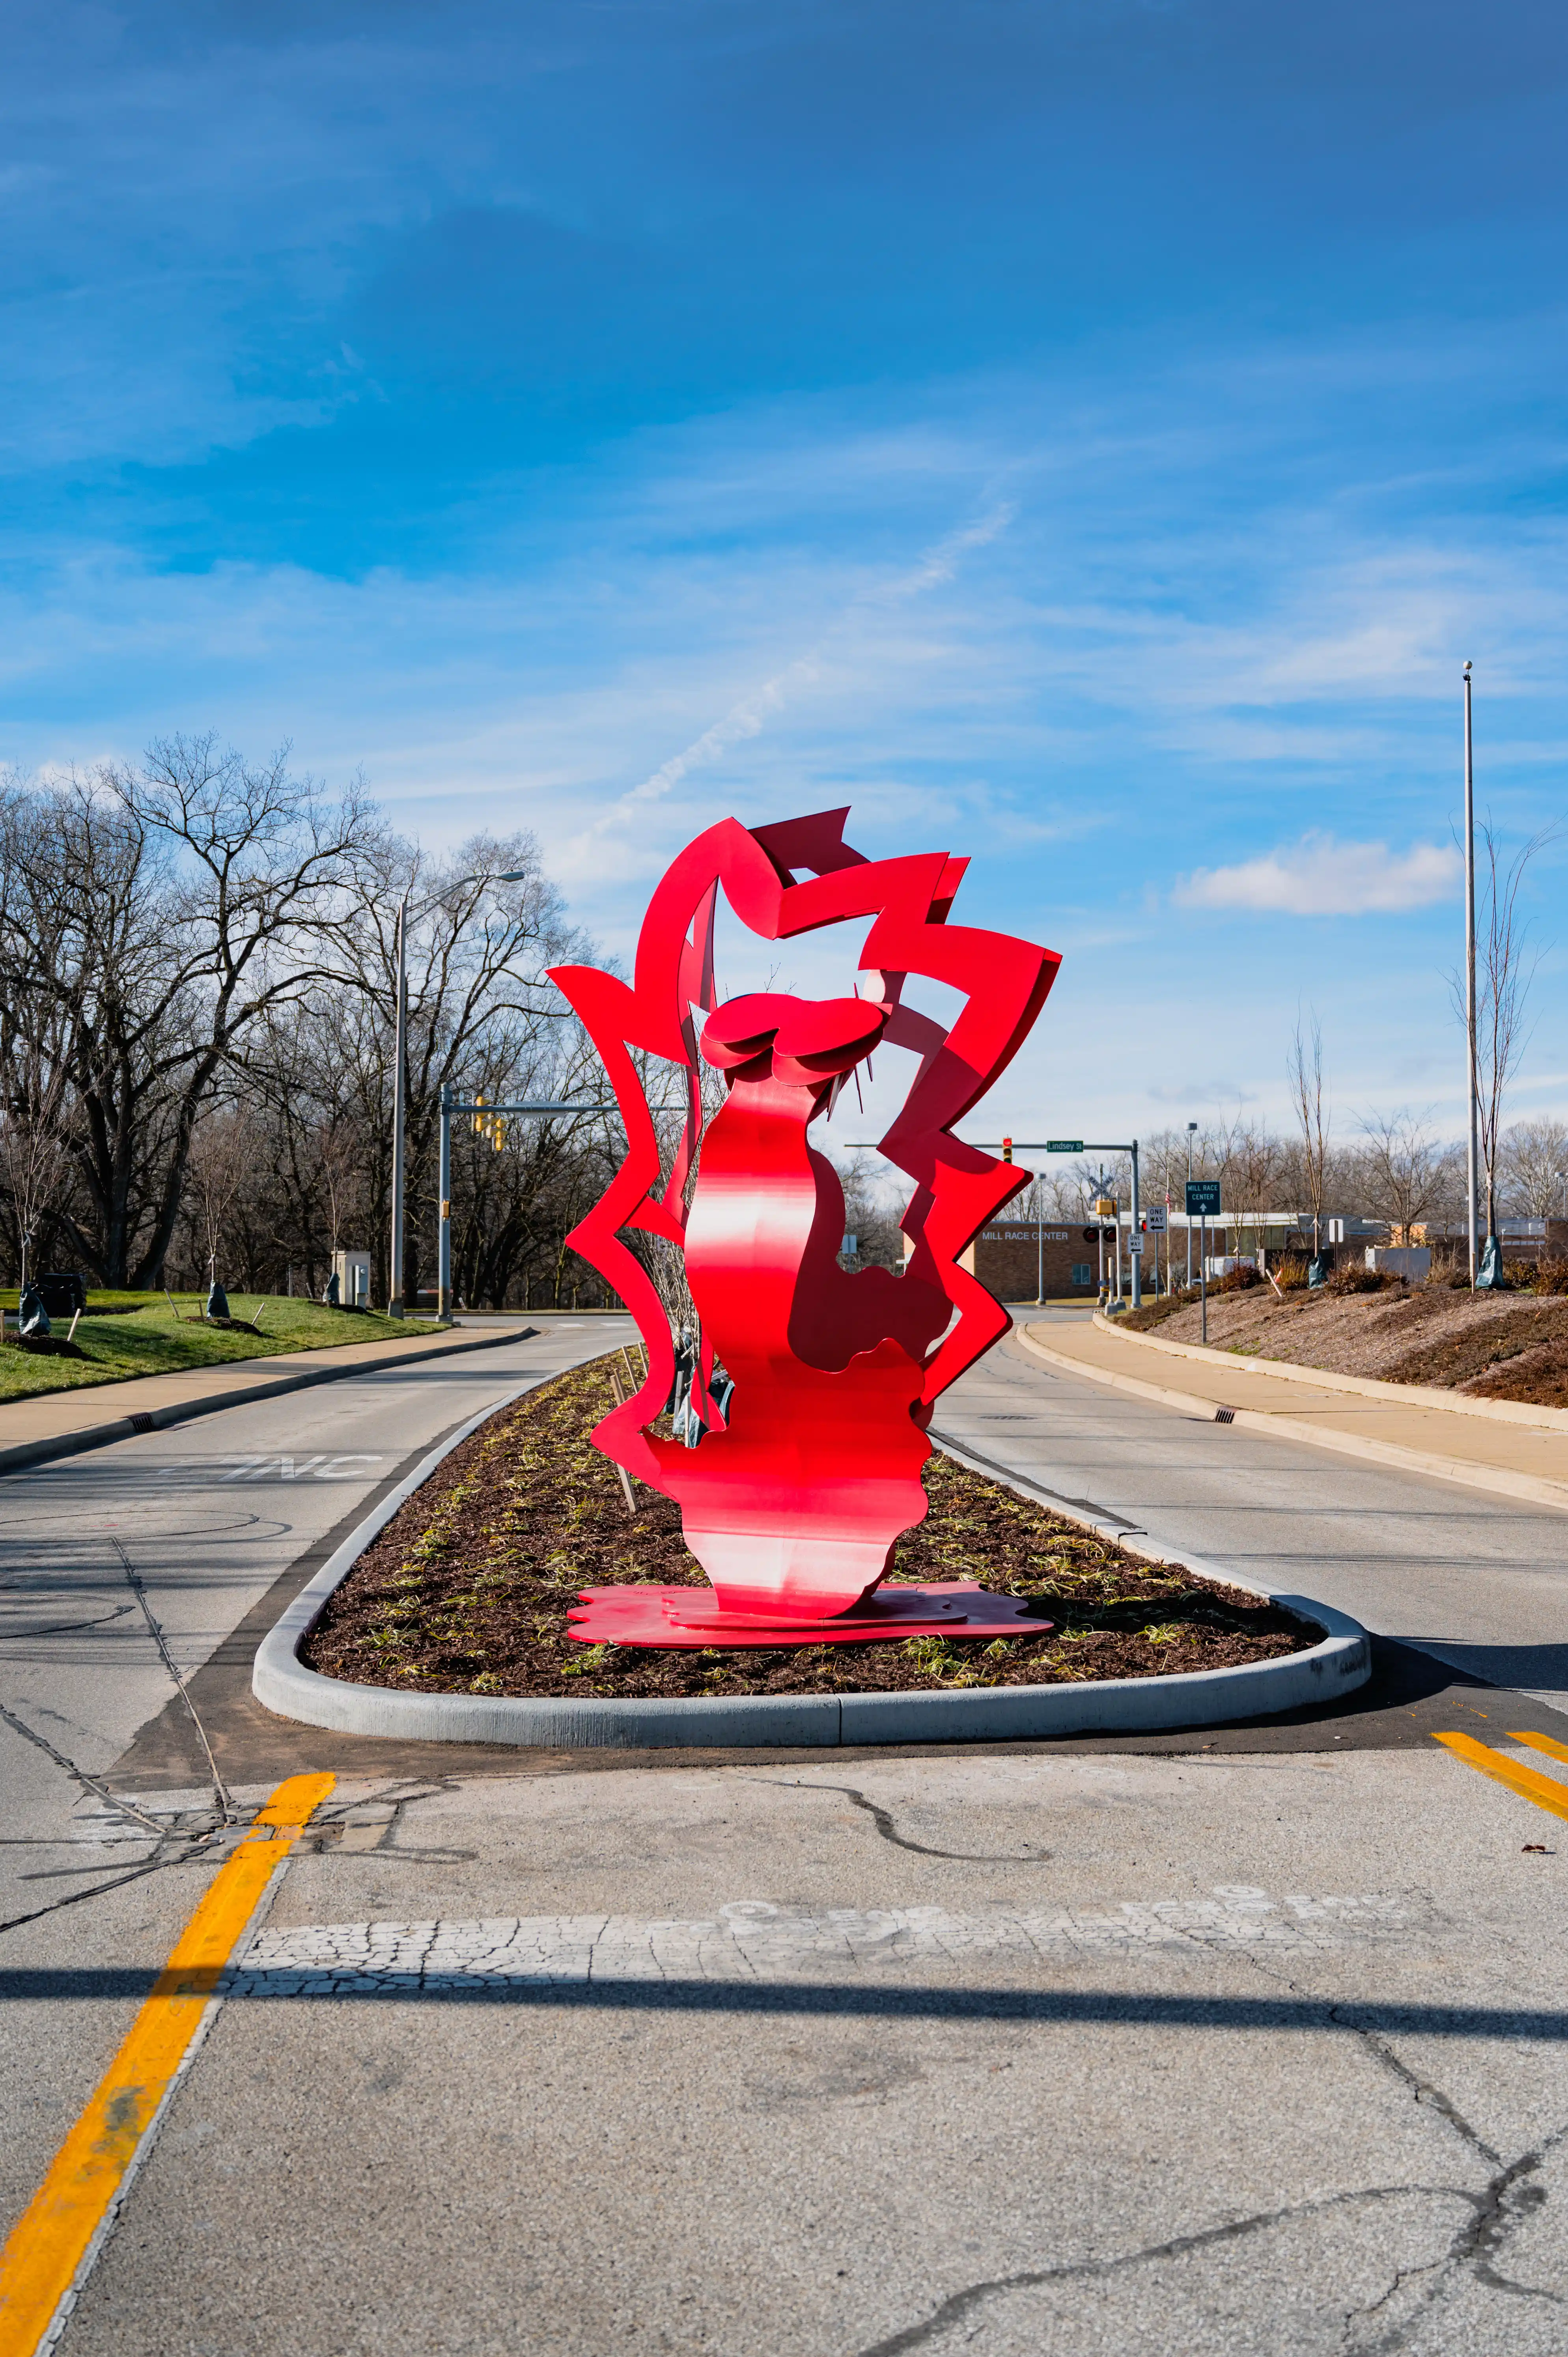 Red abstract sculpture at a road median under a clear blue sky.